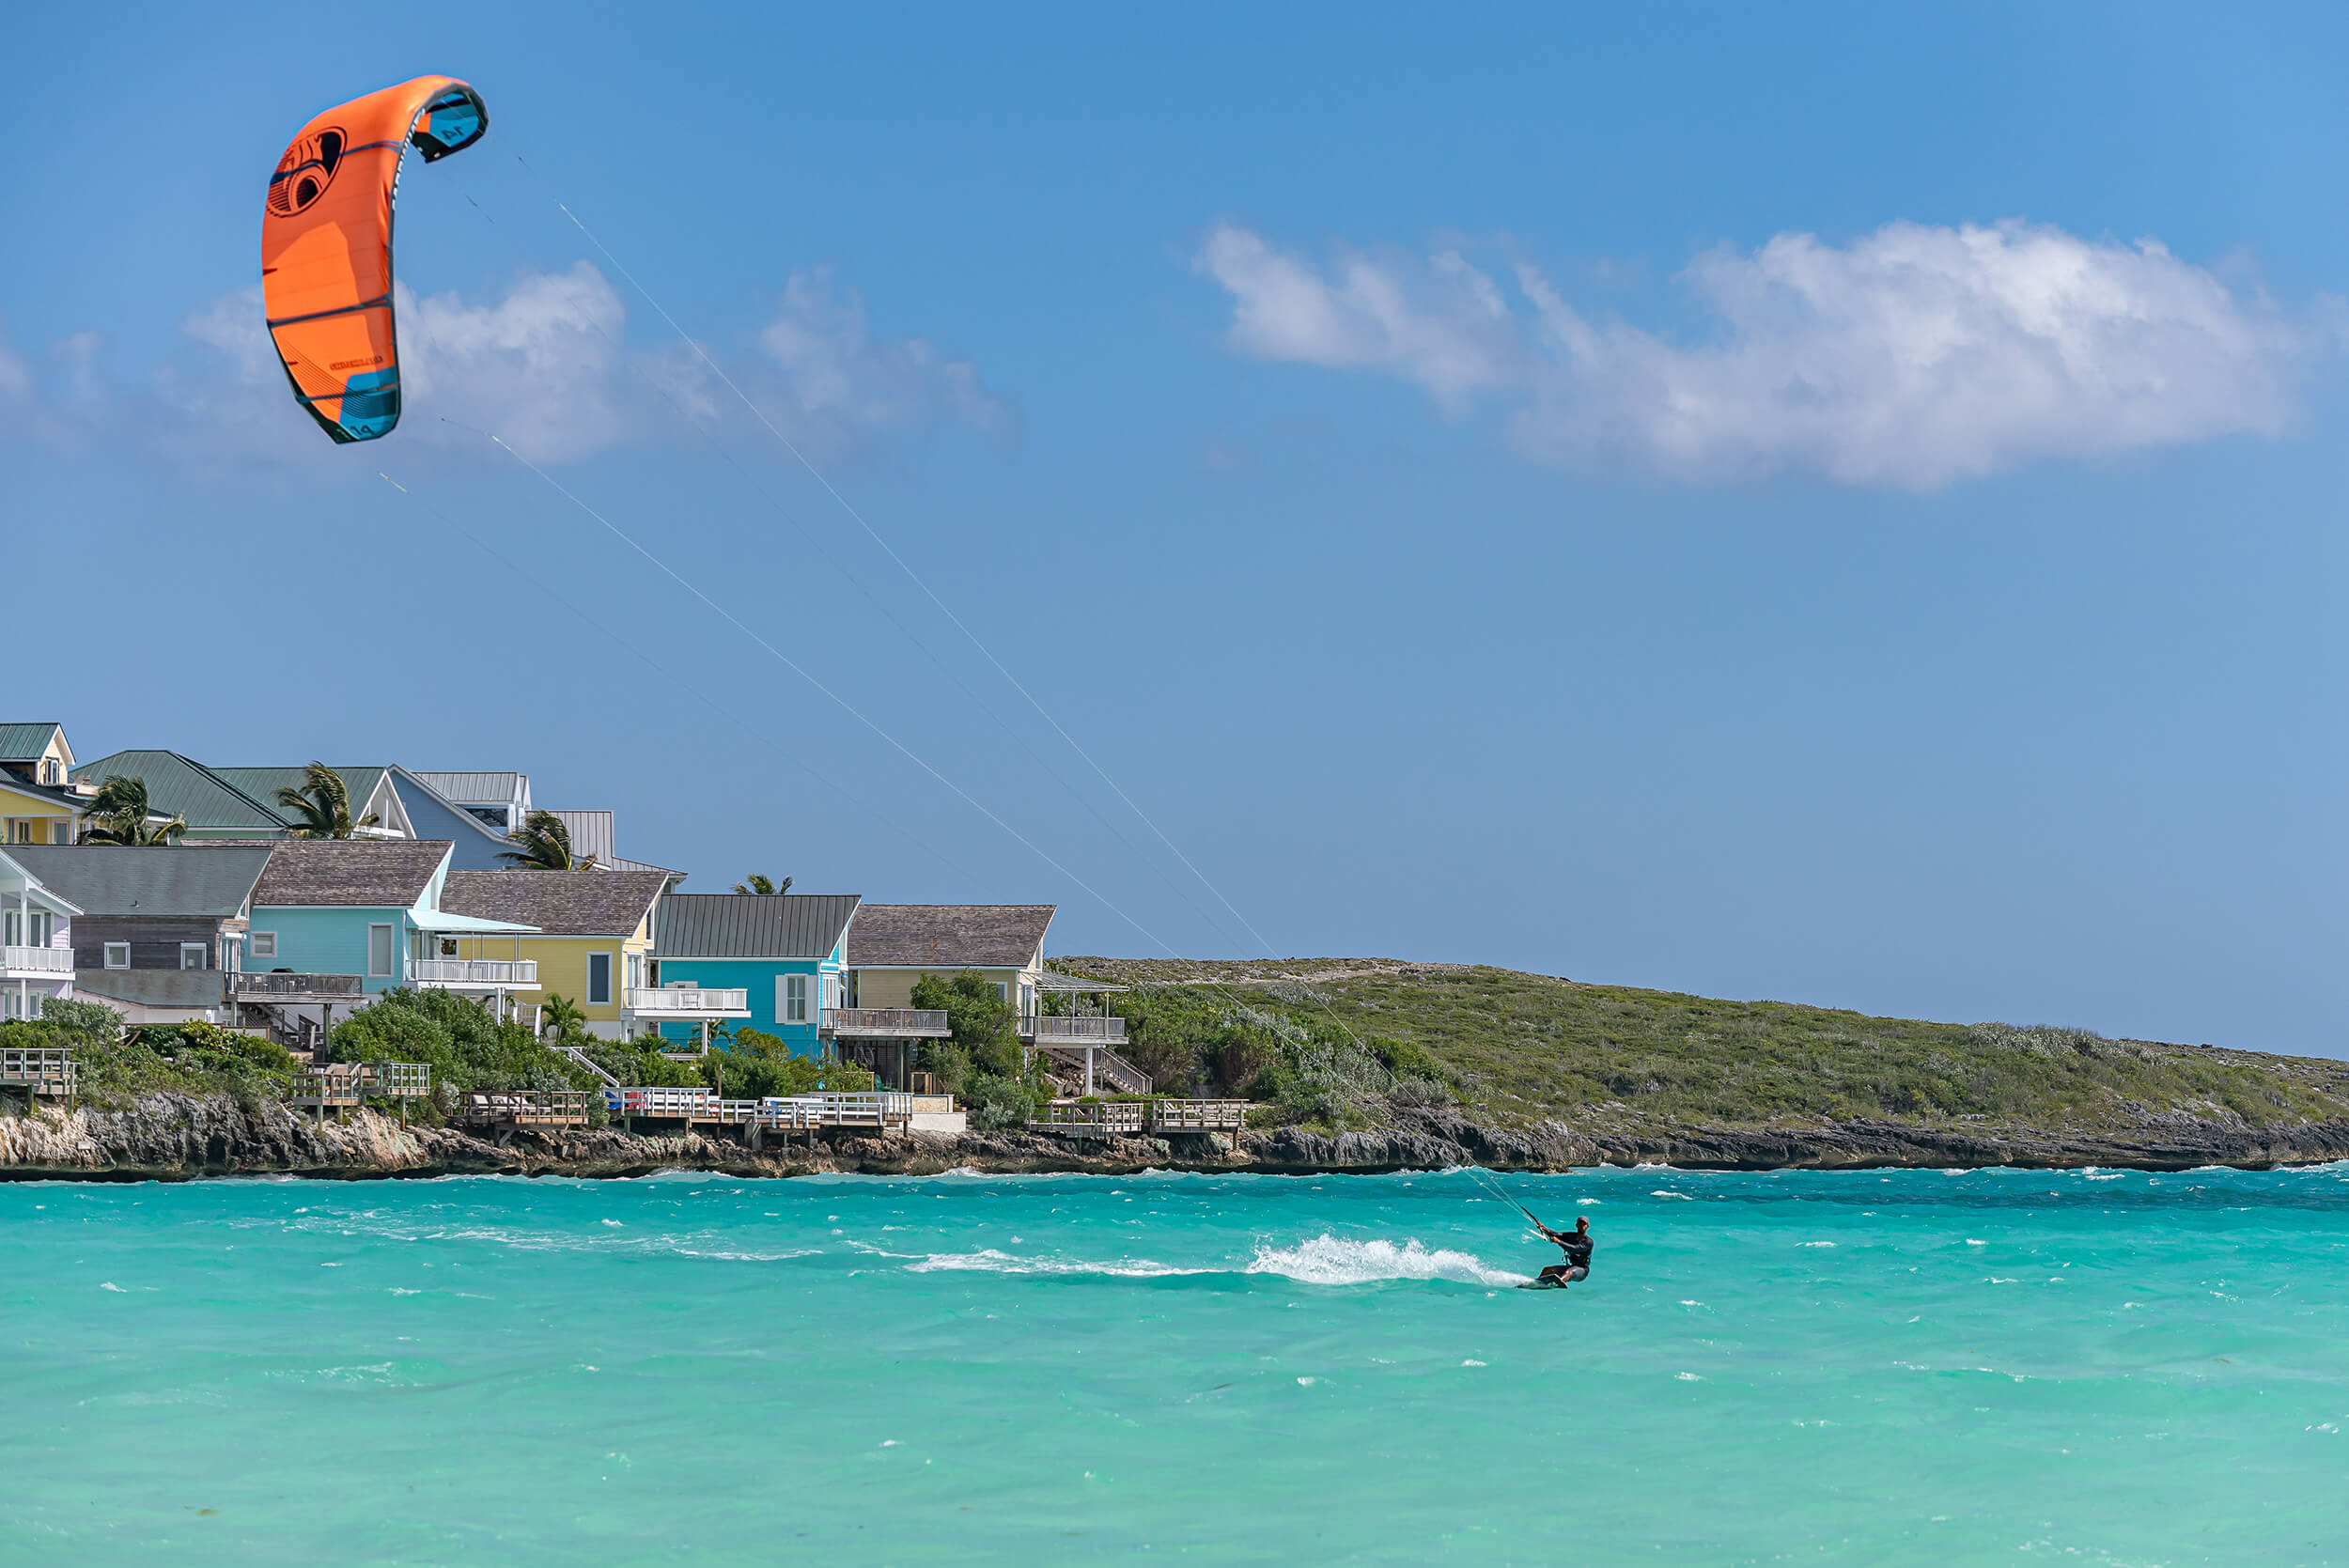 Kite surfer gliding on the blue waters near The Abaco Club's coastal living area